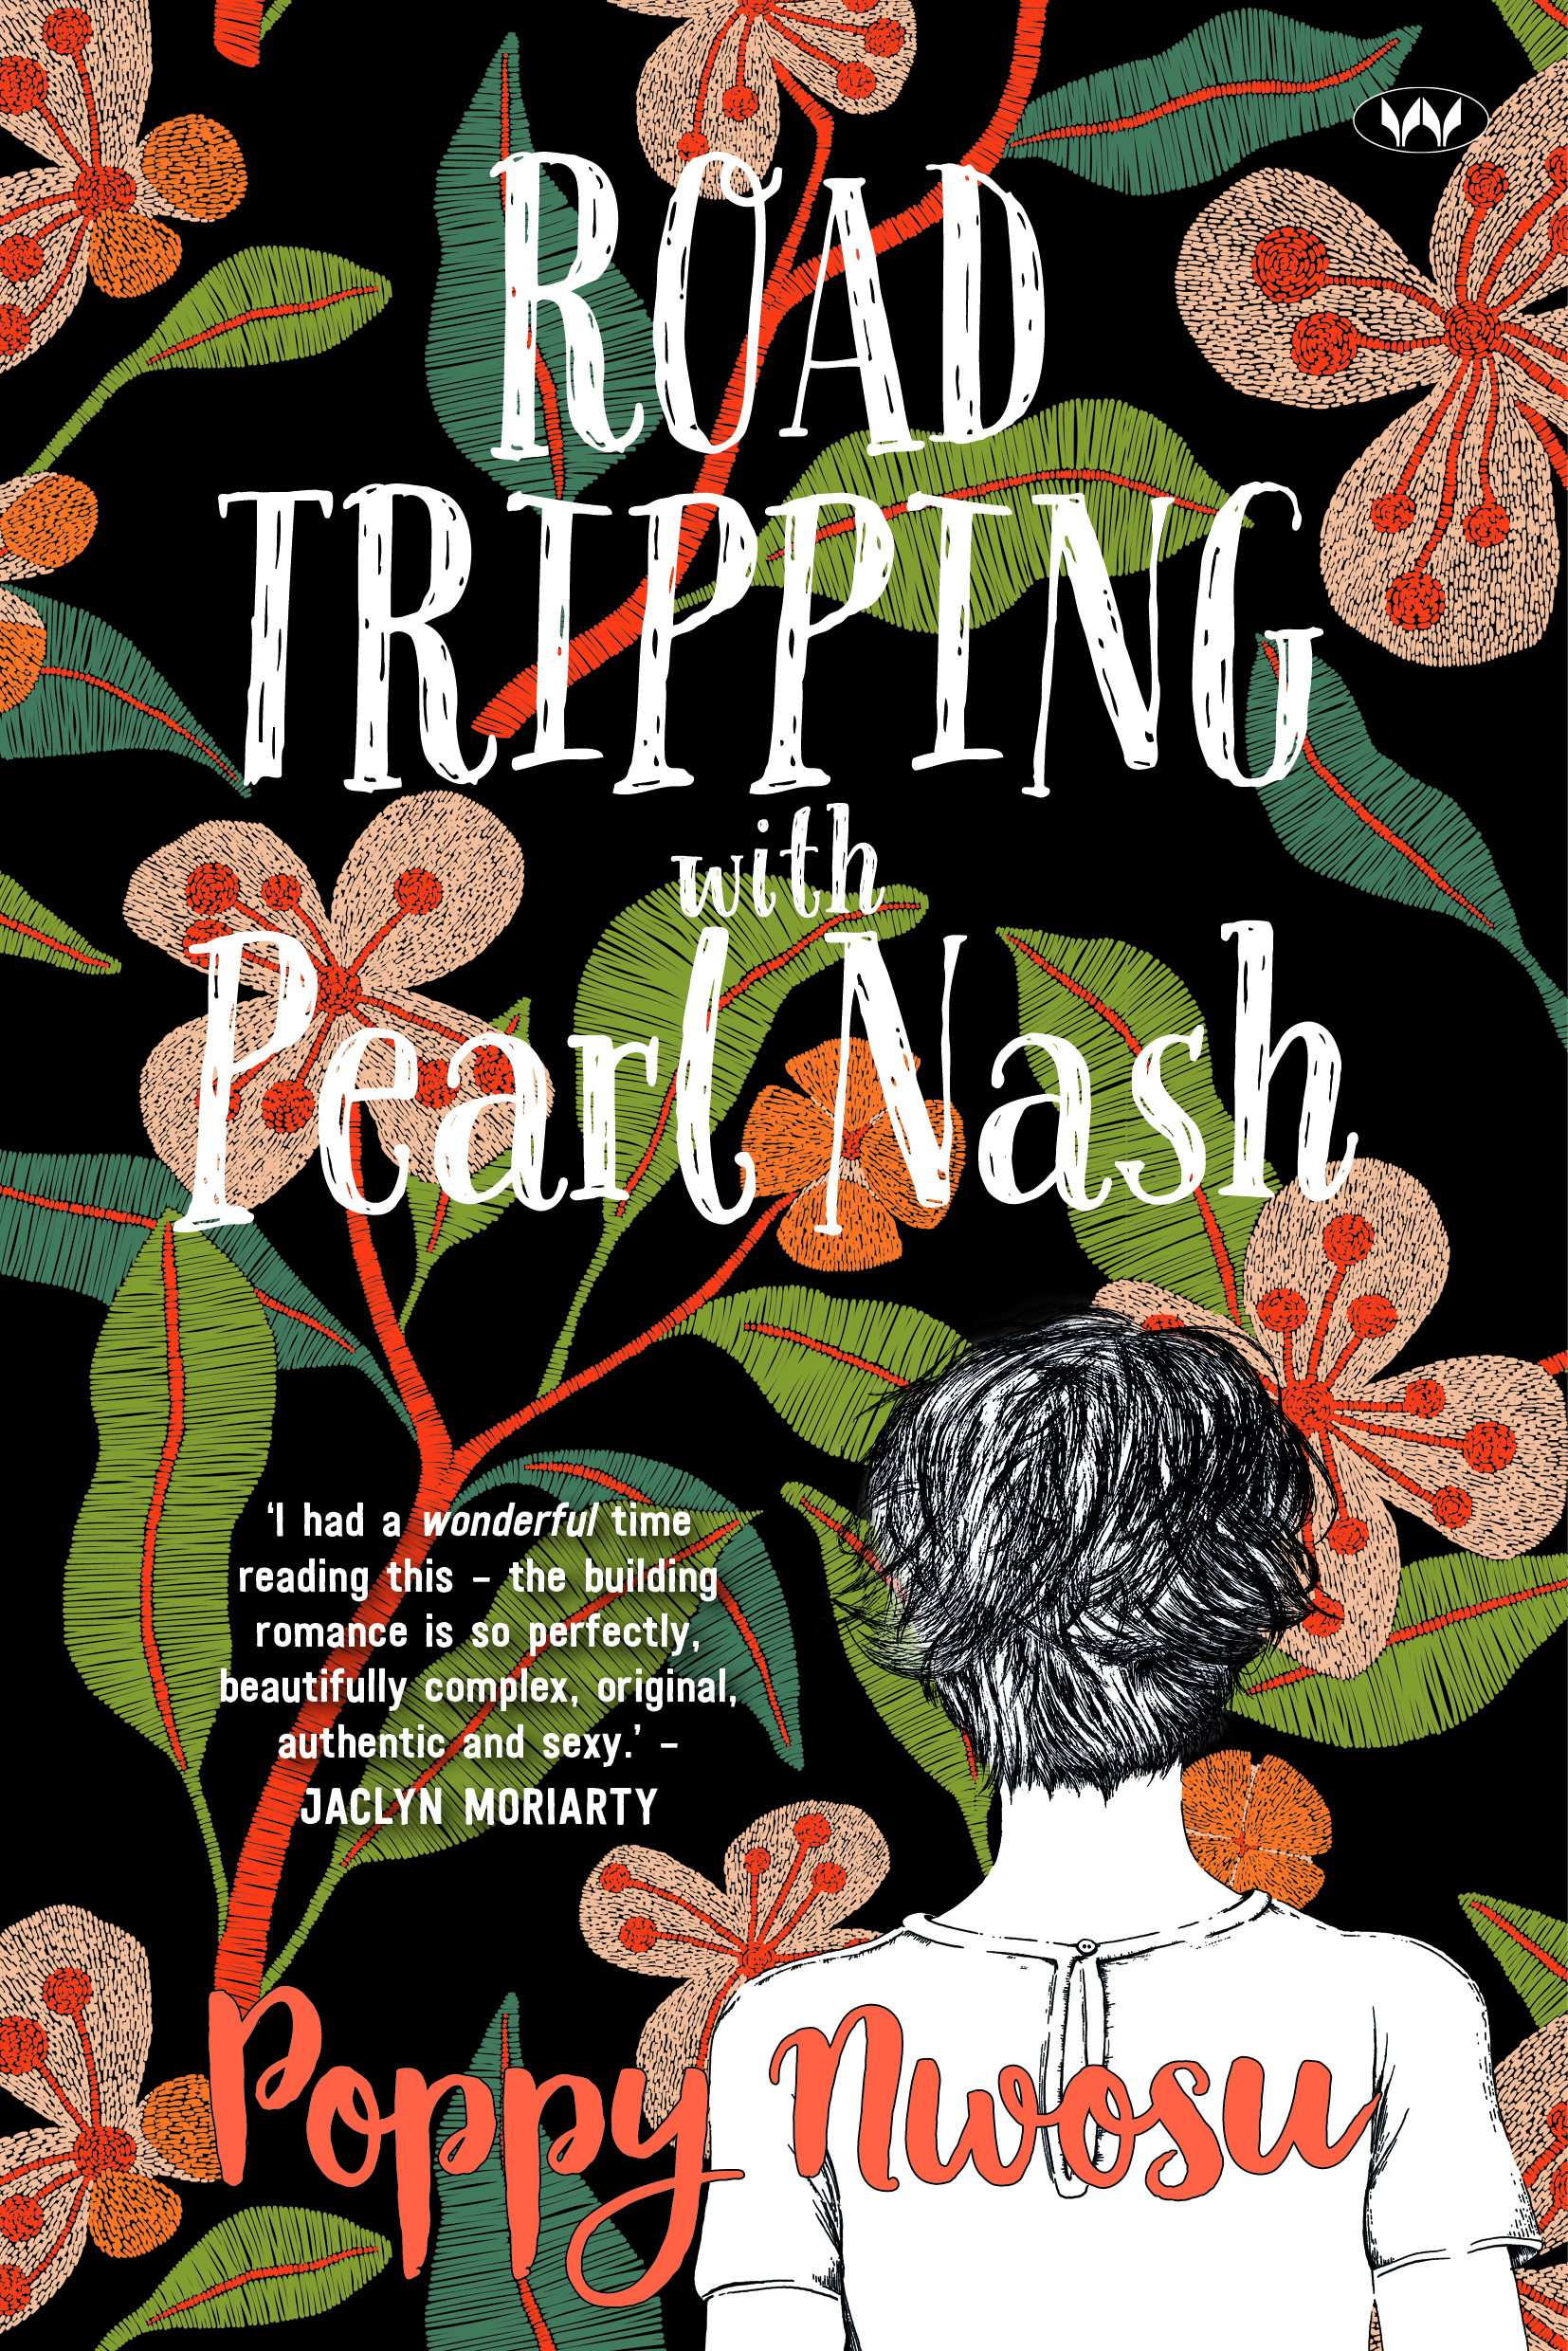 Road Tripping with Pearl Nash